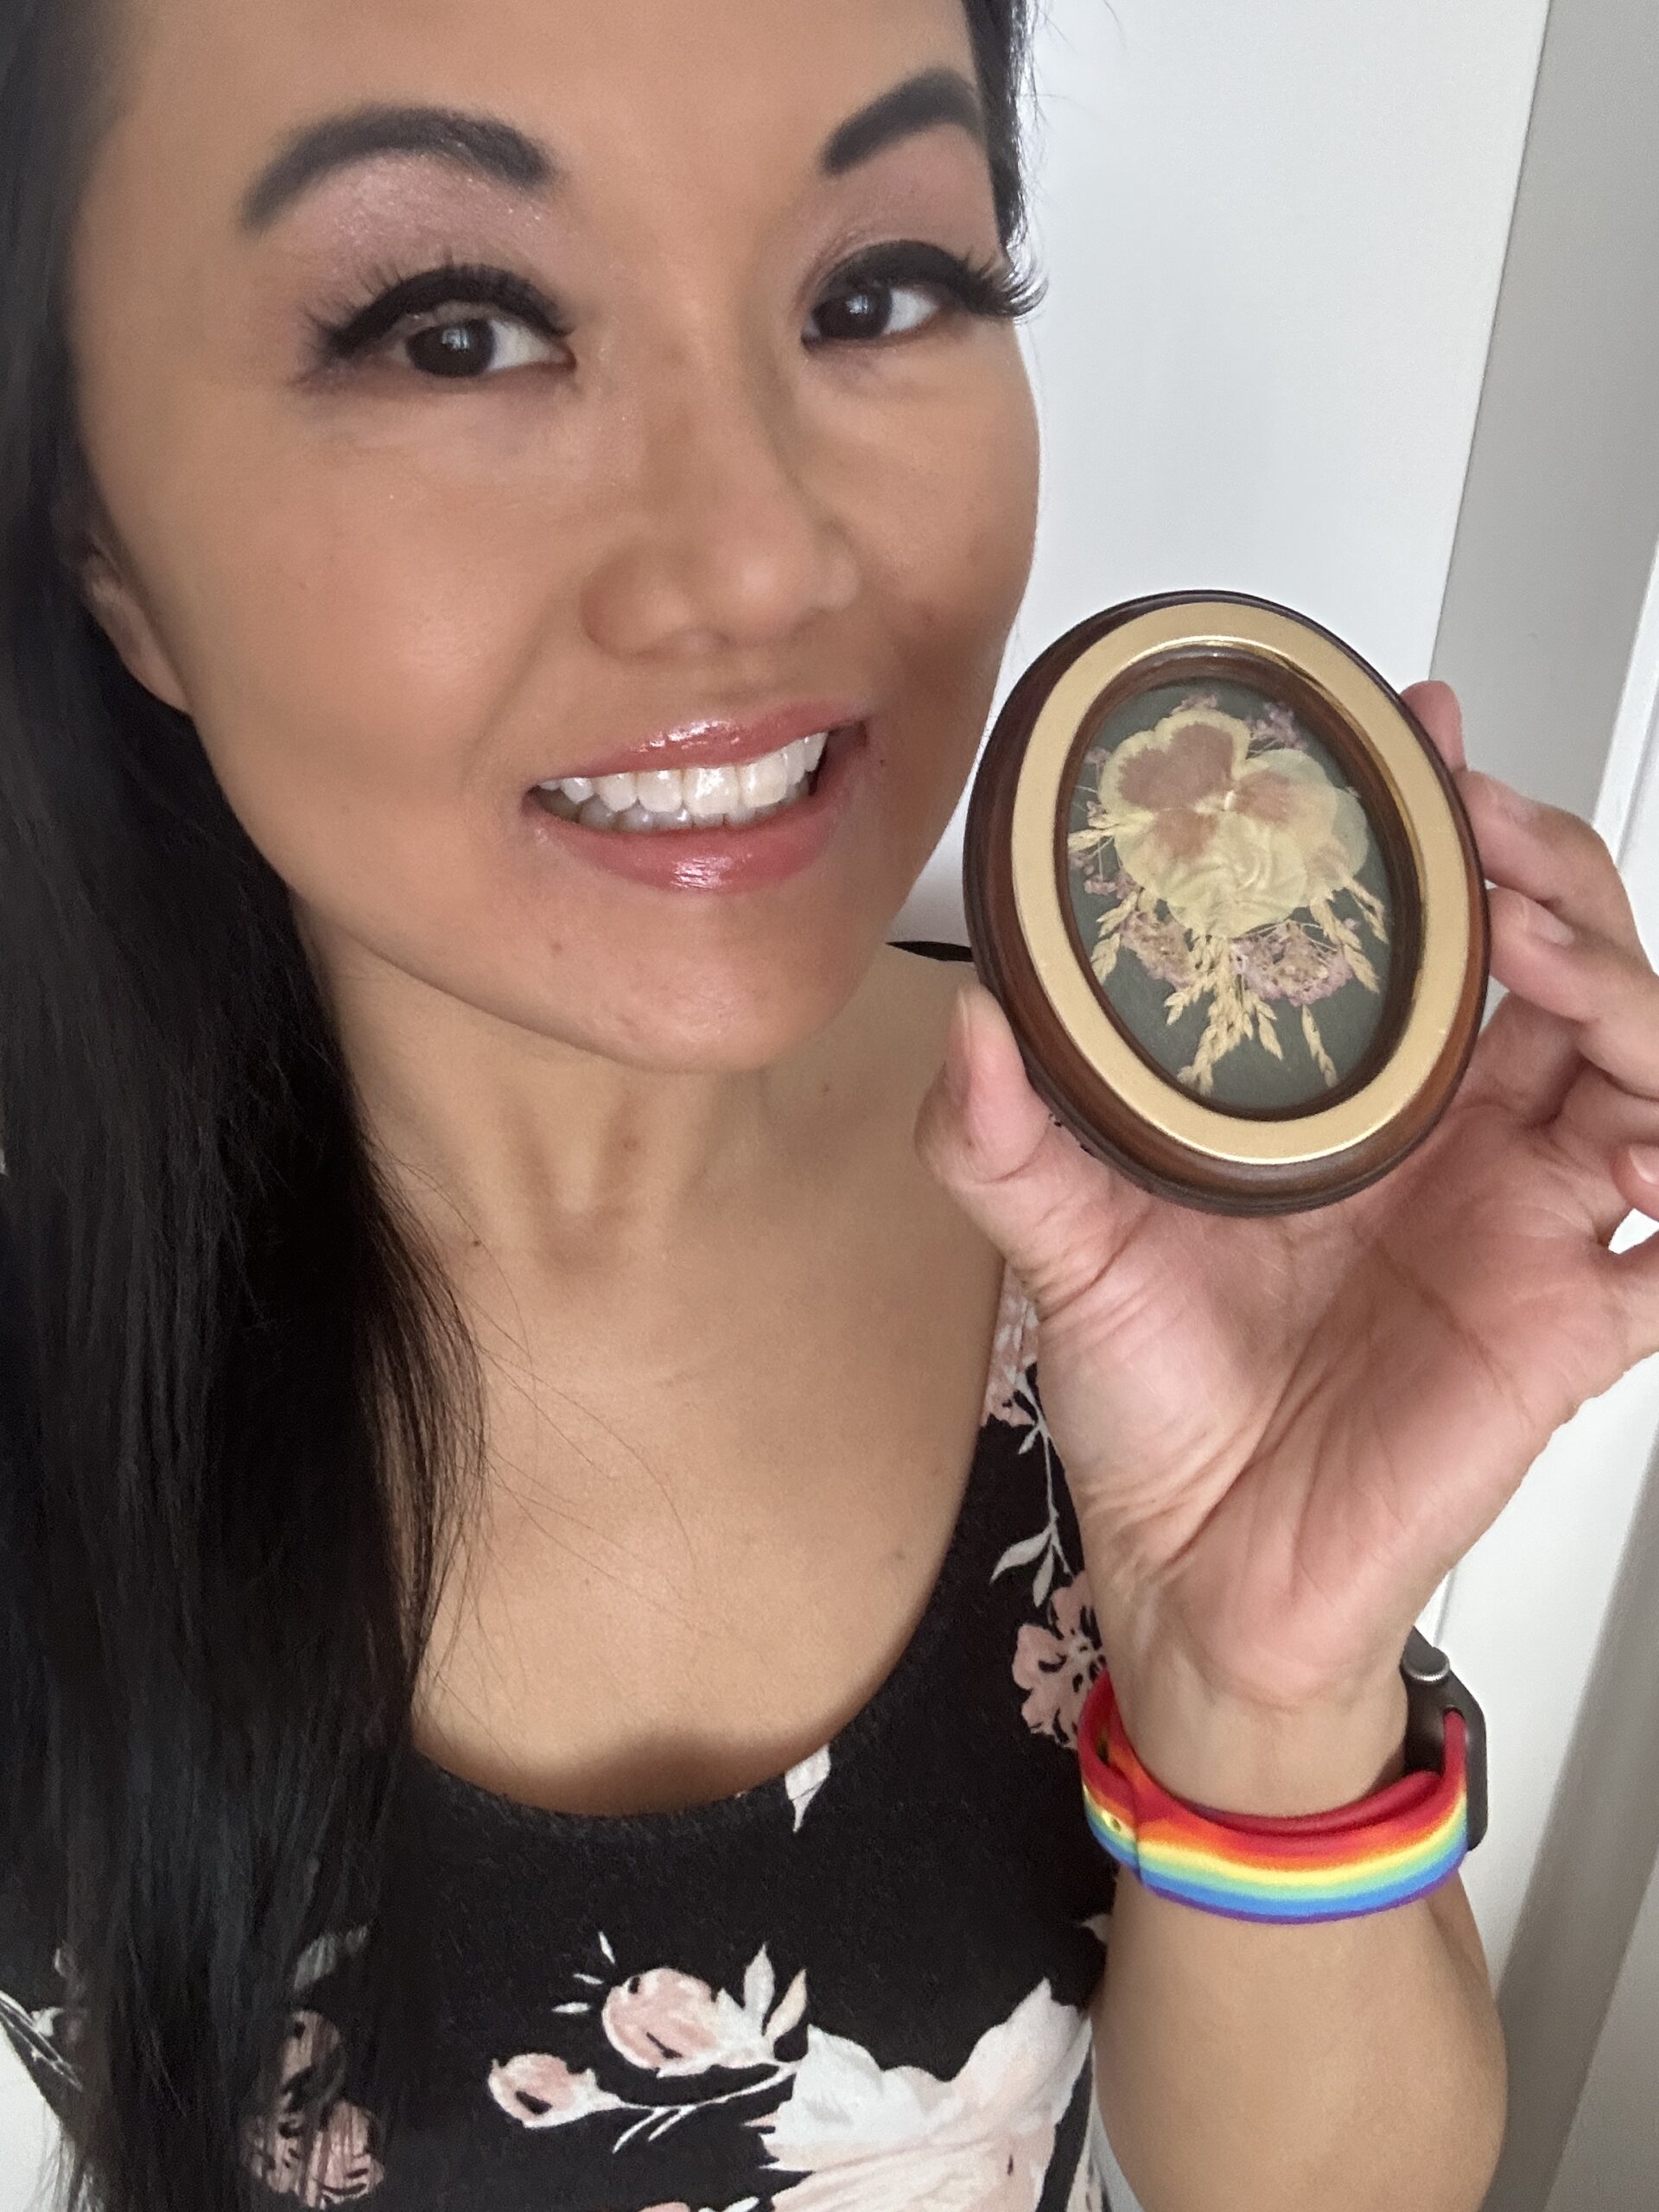 Catherine Lewis has black eye makeup, long black hair, and is holding a small frame with pressed flowers.